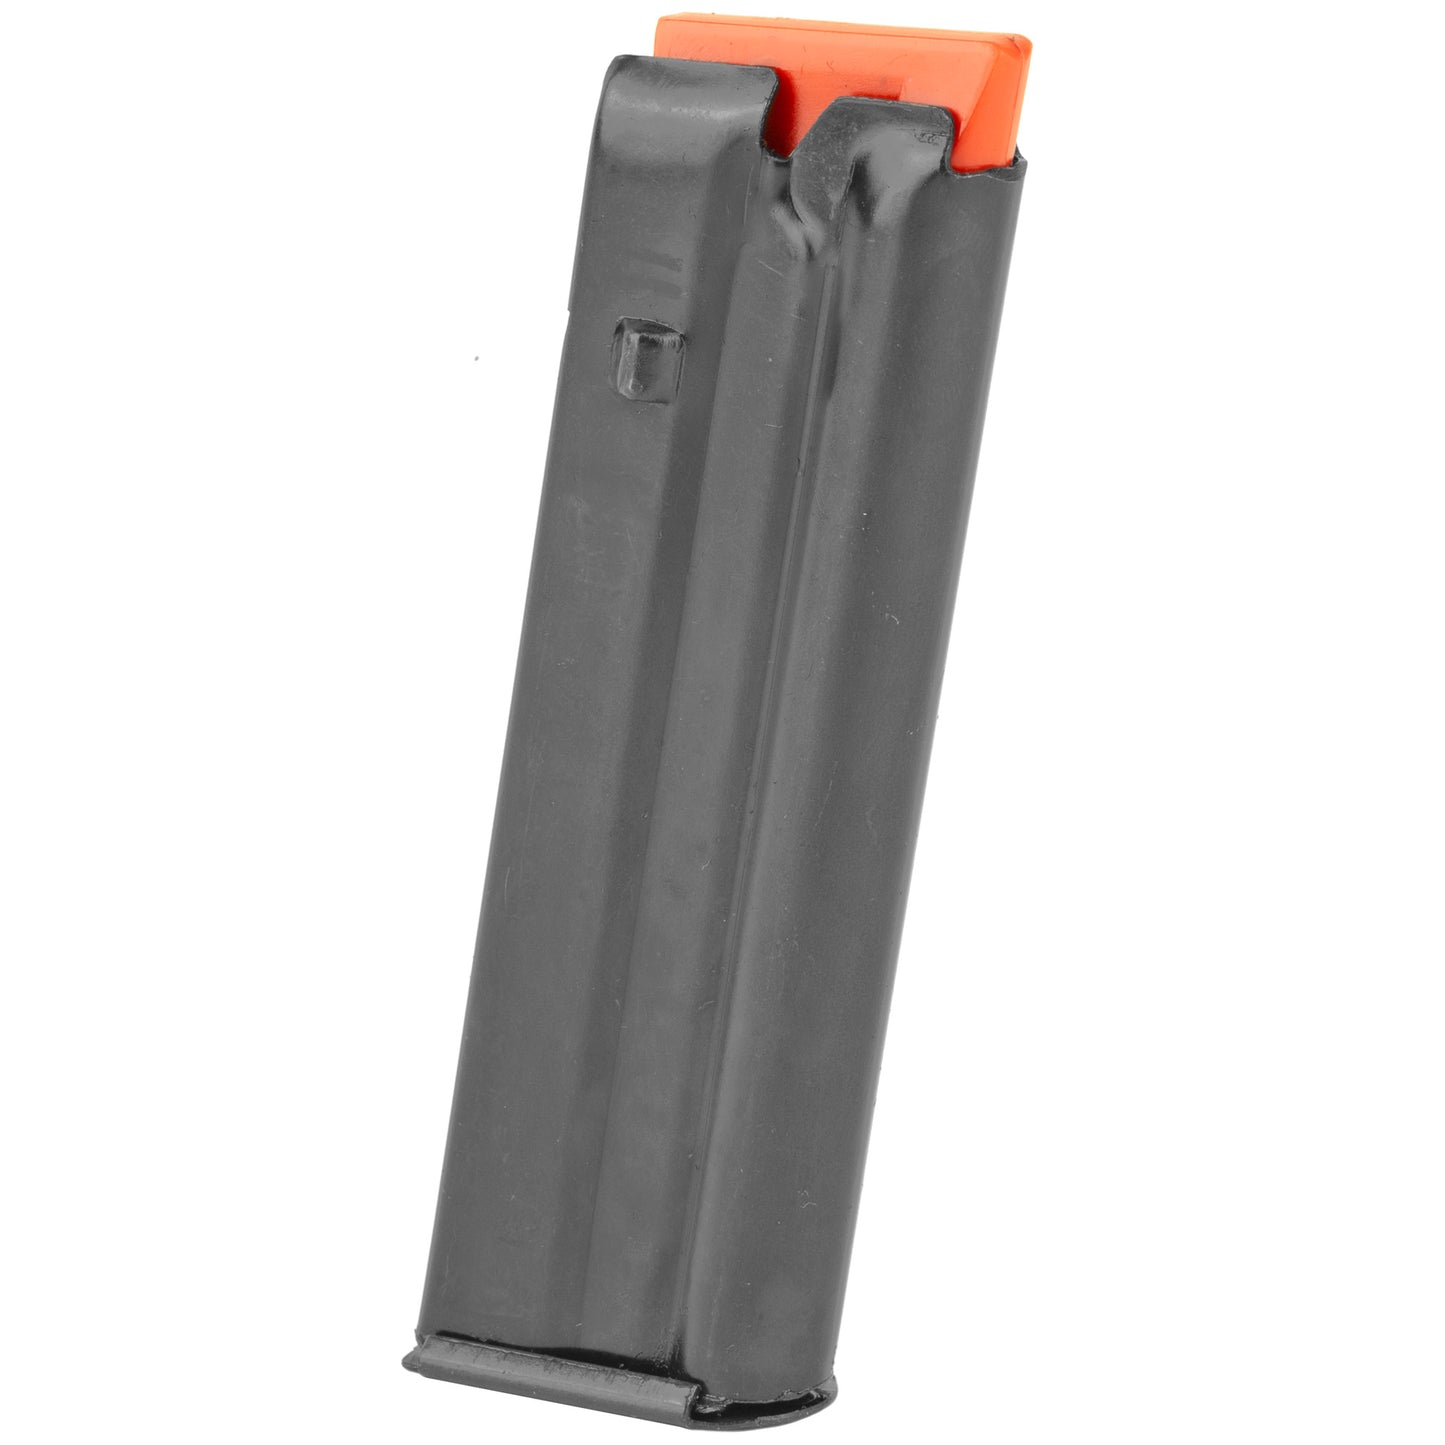 Rossi Rifle Magazine 22LR 10 Rounds Fits Rossi RS22 Rifles Steel 358-0001-00 - California Shooting Supplies